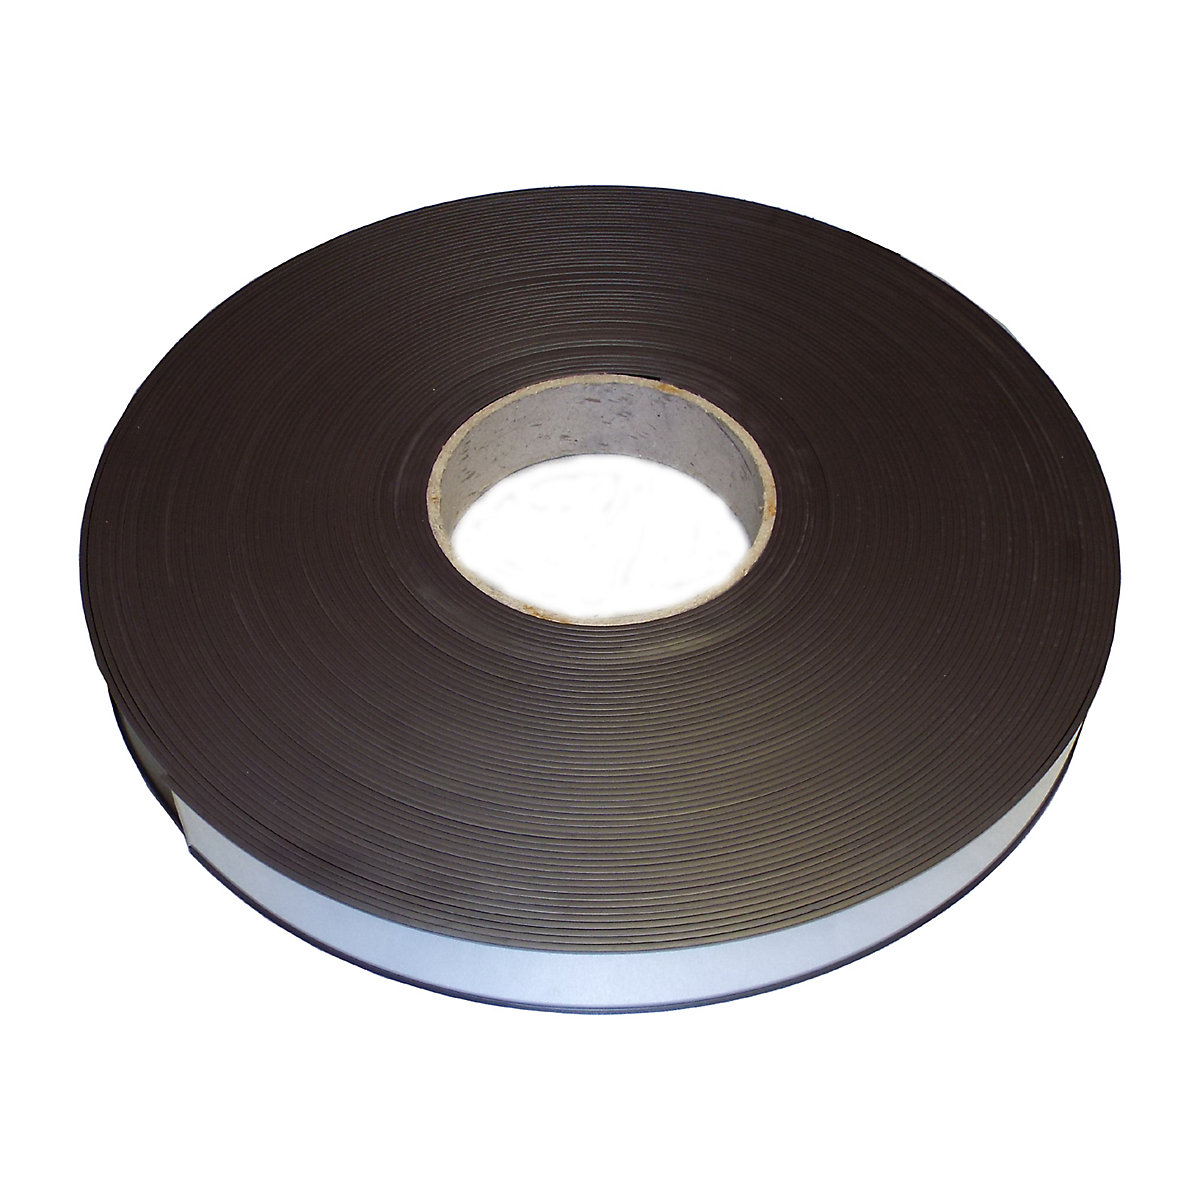 Label holders, magnetic, sold by the roll, length 50 m, height 50 mm-2